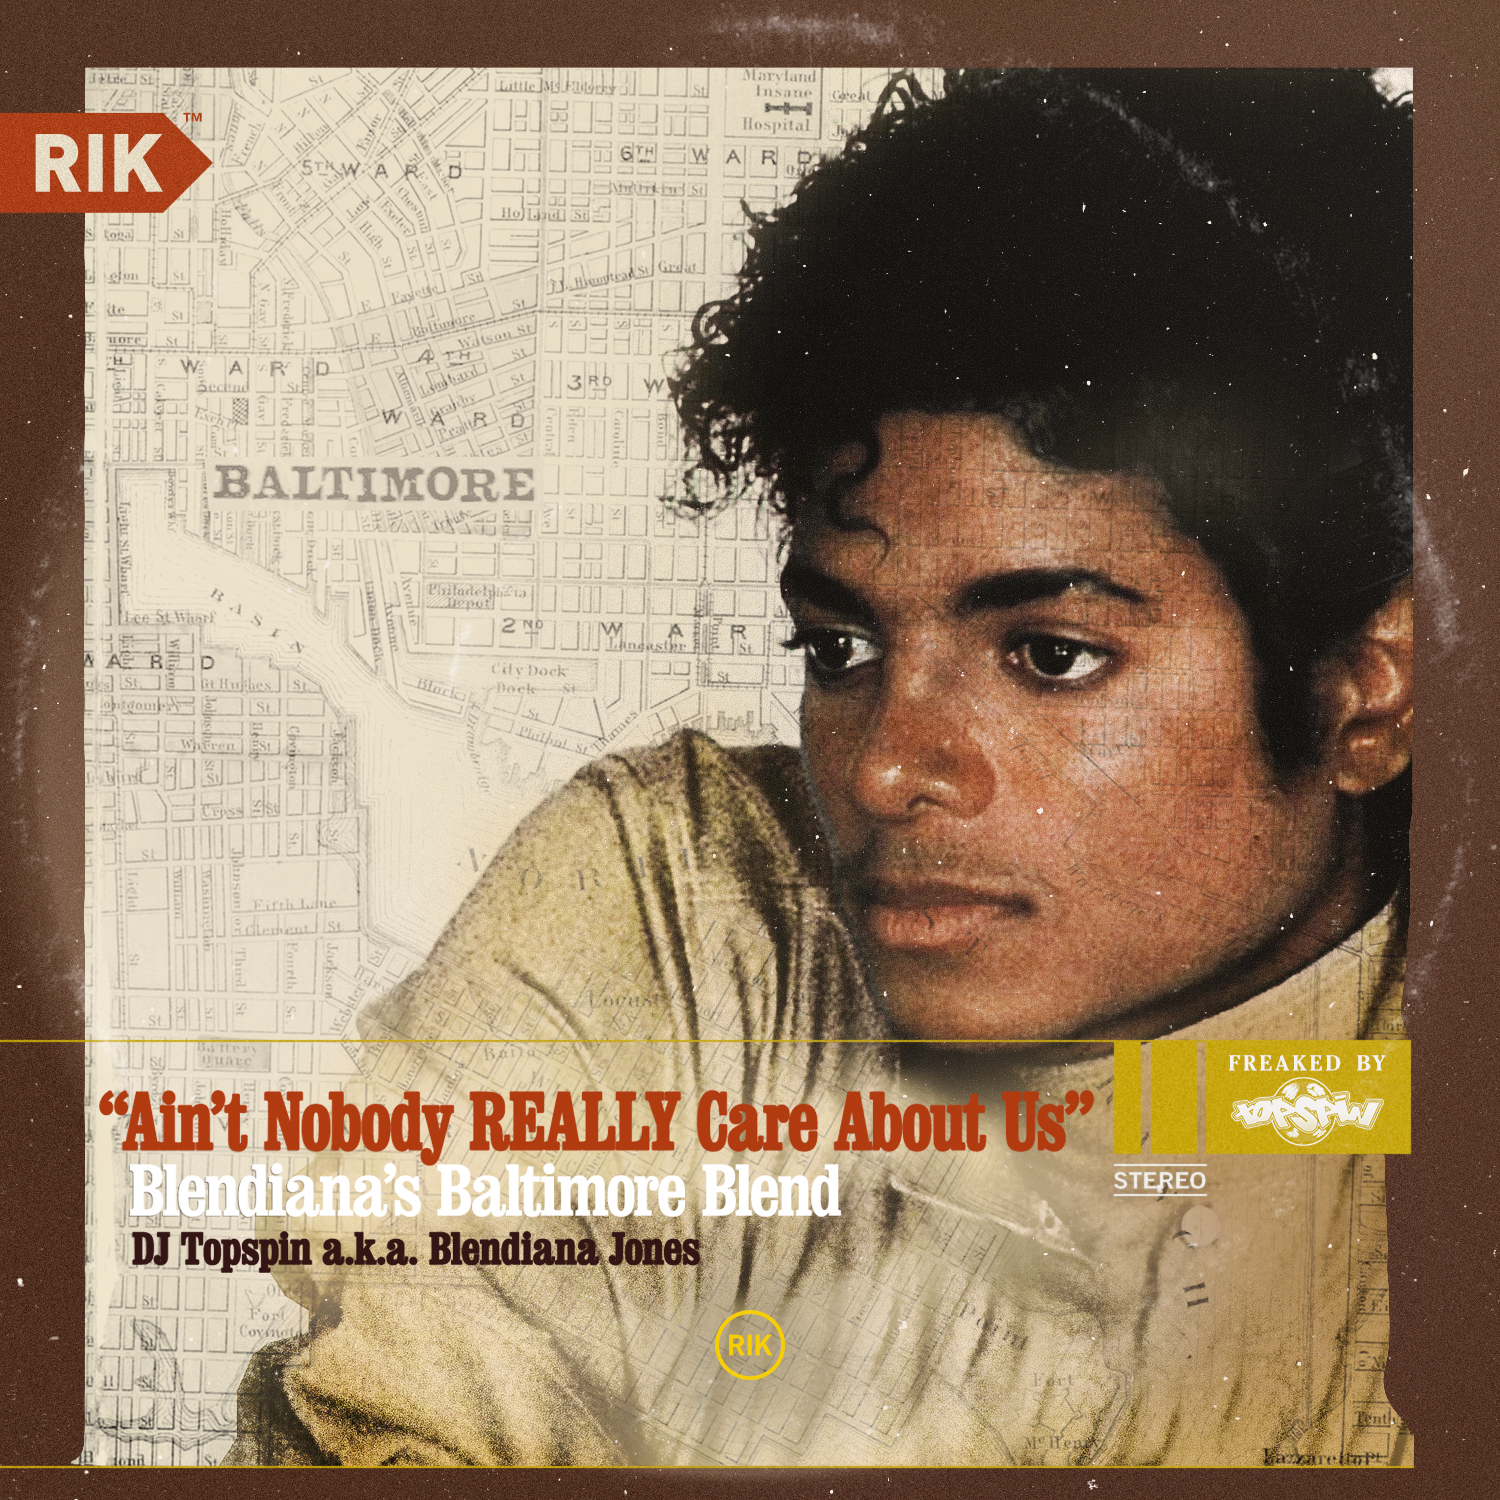 Michael Jackson — “Ain’t Nobody REALLY Care About Us” (Blendiana Baltimore Blend)